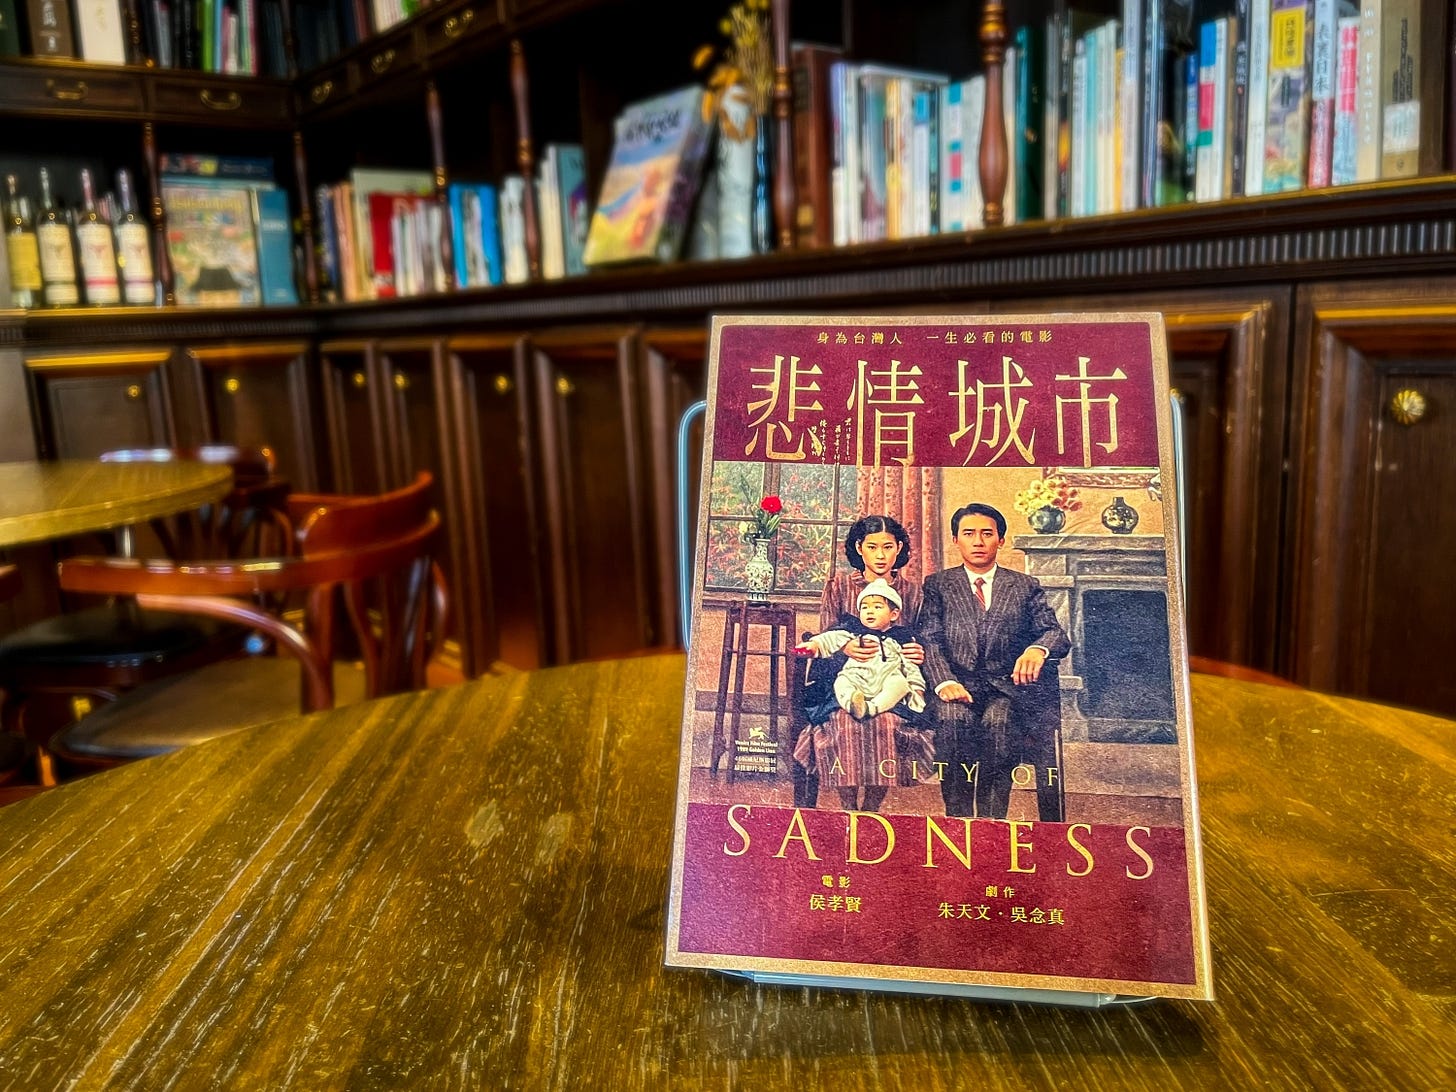 The cover for the script to Hou Hsiao-hsien’s City of Sadness features gold lettering on a burgundy background